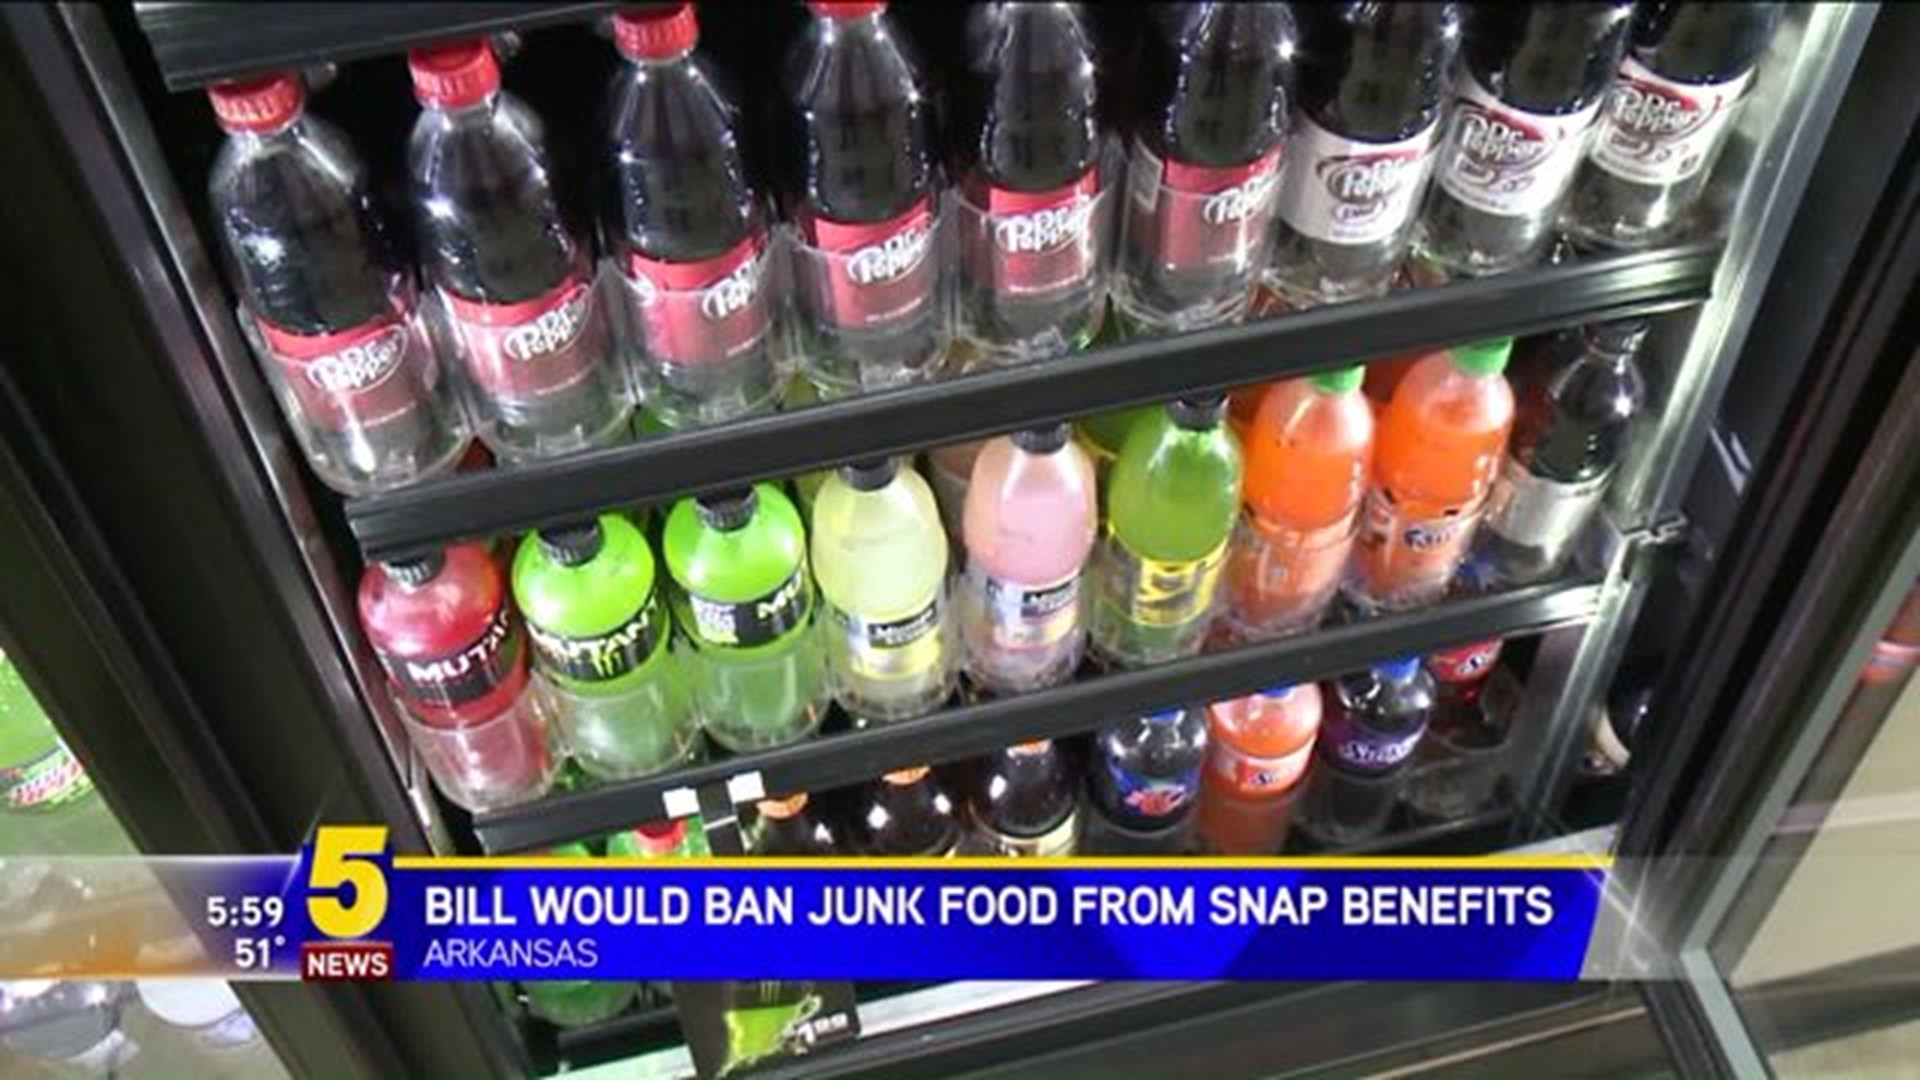 BILL WOULD BAN JUNK FOOD FROM BEING BOUGHT WITH SNAP BENEFITS